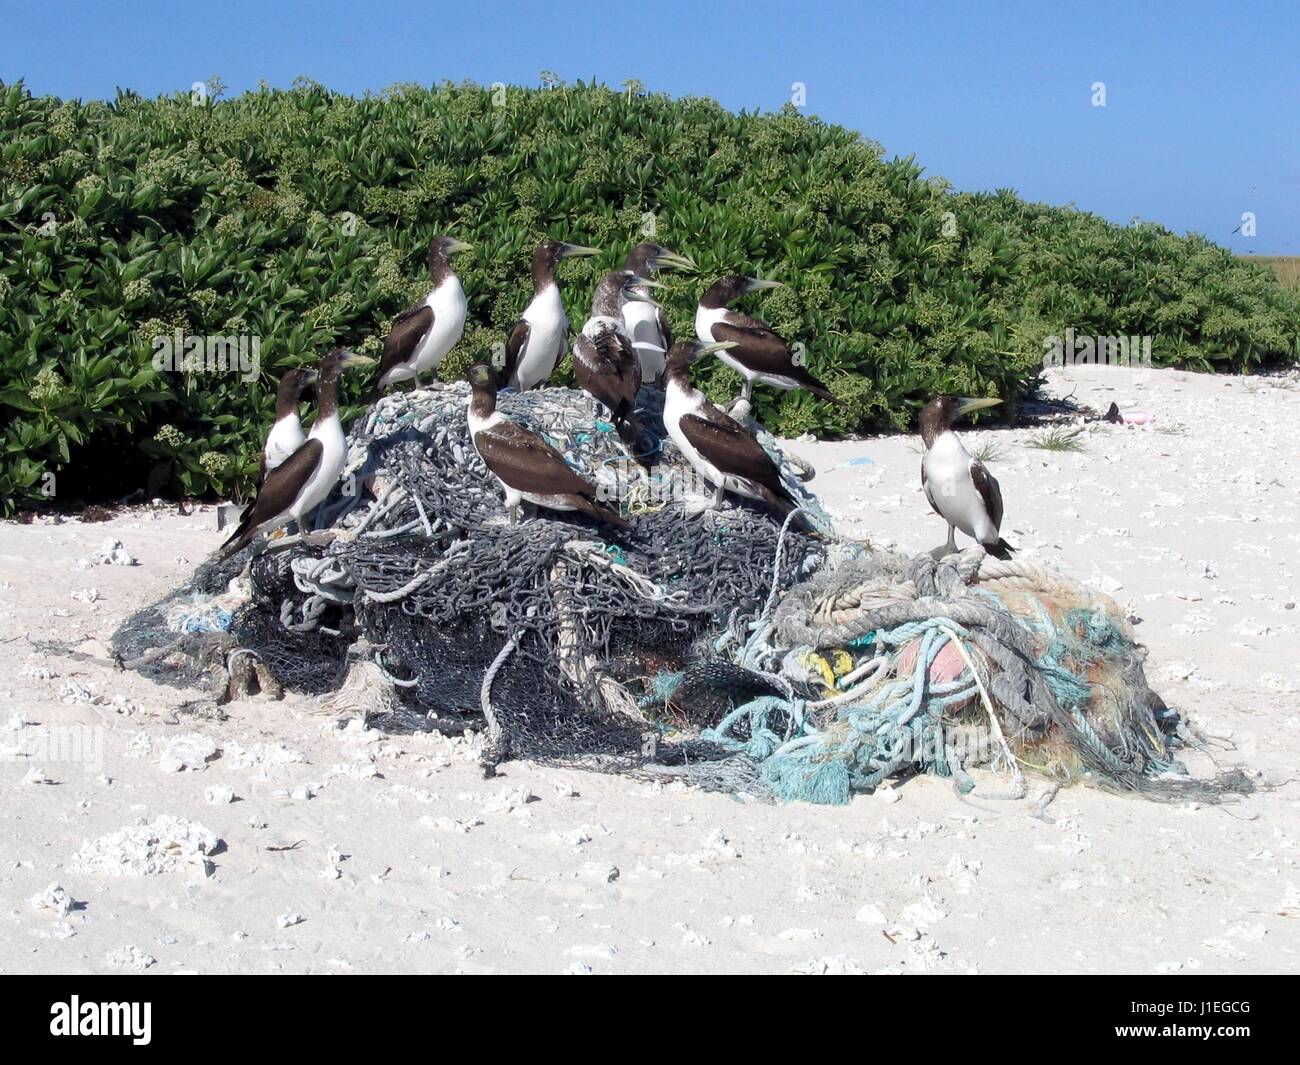 Birds sit on top of a pile of discarded fishing net on Laysan Island in the Papahanaumokuakea Marine National Monument September 9, 2004 in the Hawaiian Islands National Wildlife Refuge. The NOAA Marine Debris Program removes thousands of pounds of refuse each year from the islands. Stock Photo